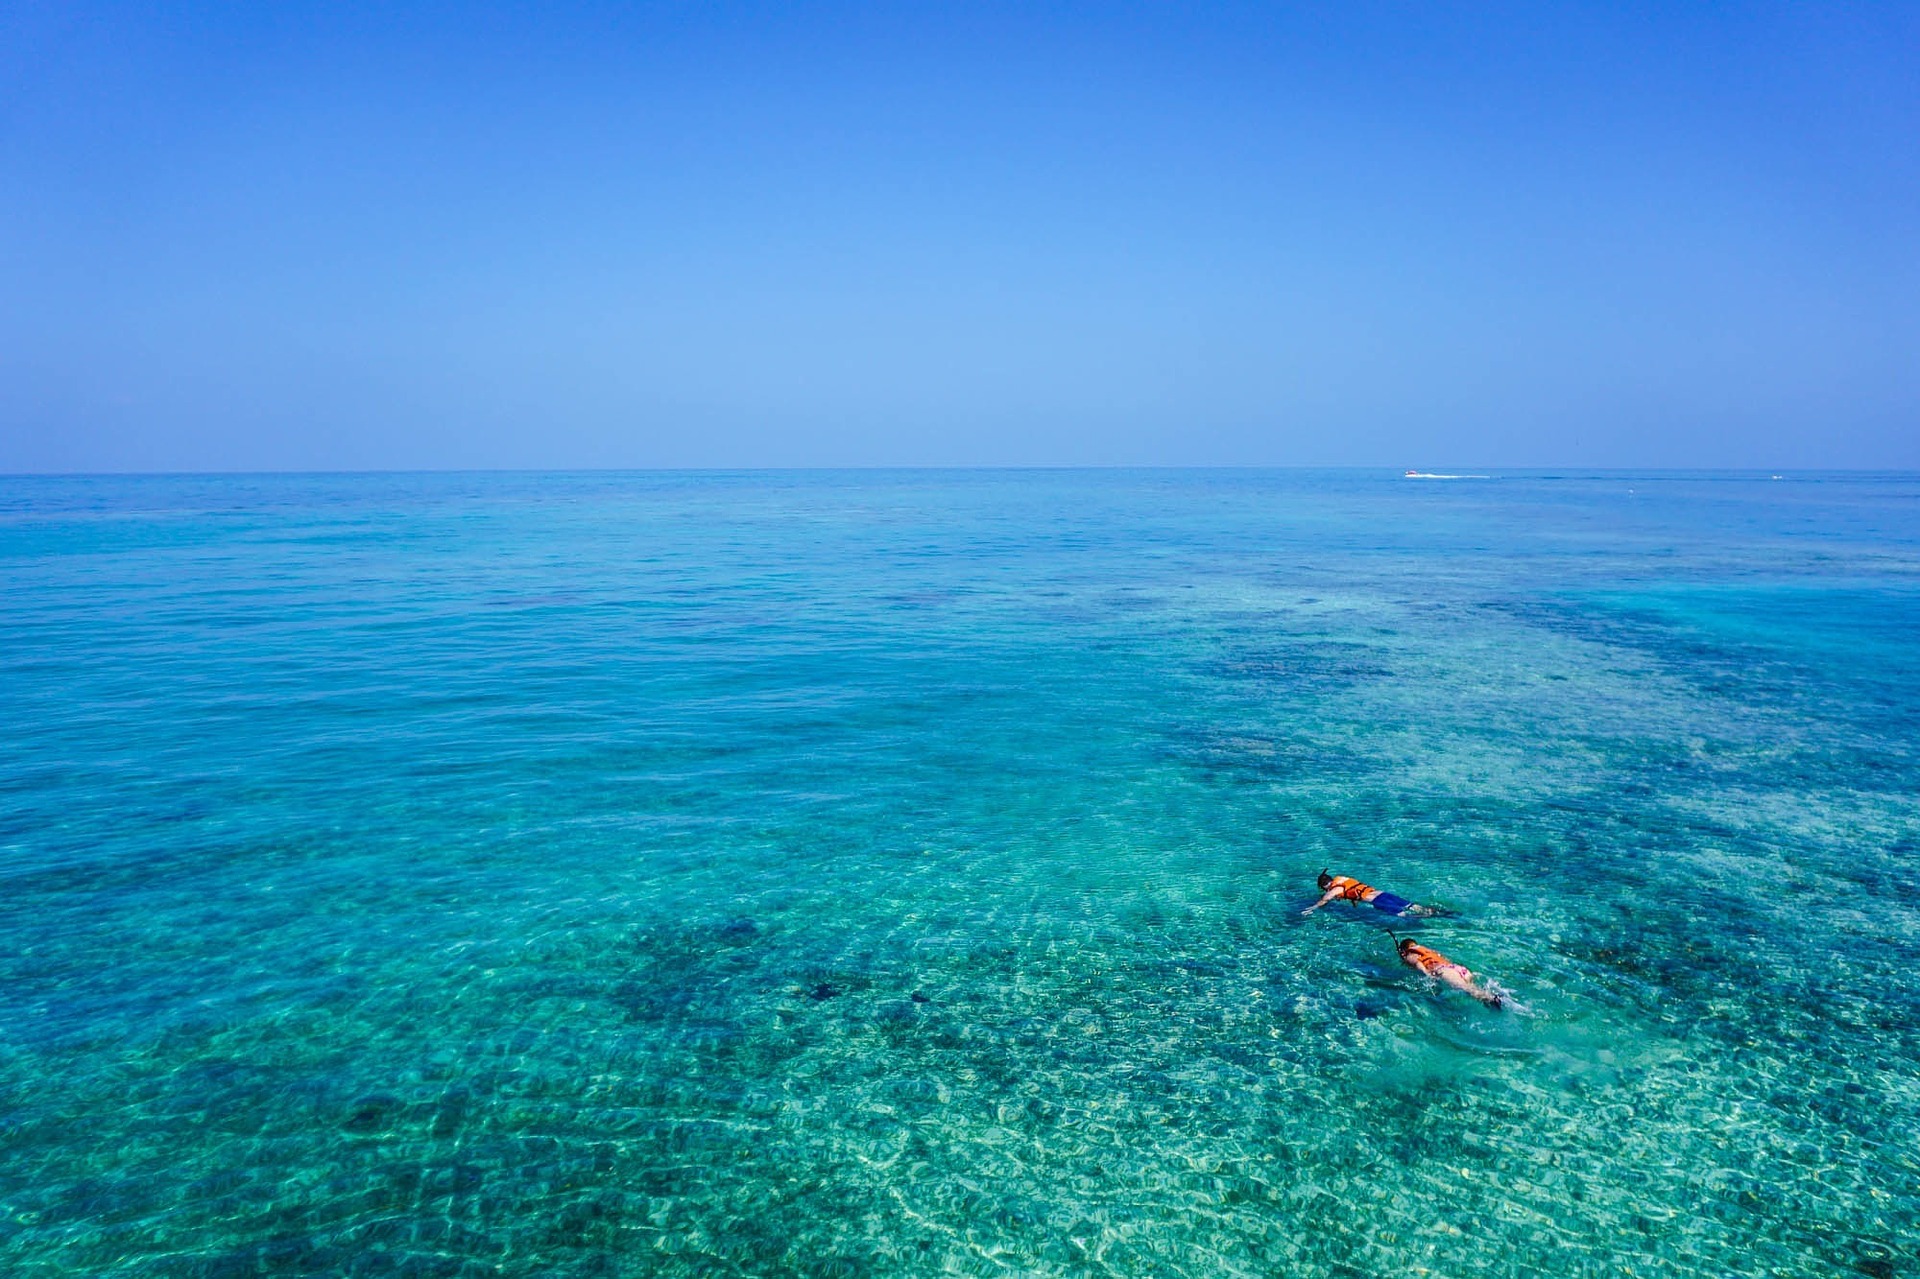 Snorkel in the crystal clear waters of Koh Lipe and explore the vibrant aquatic life